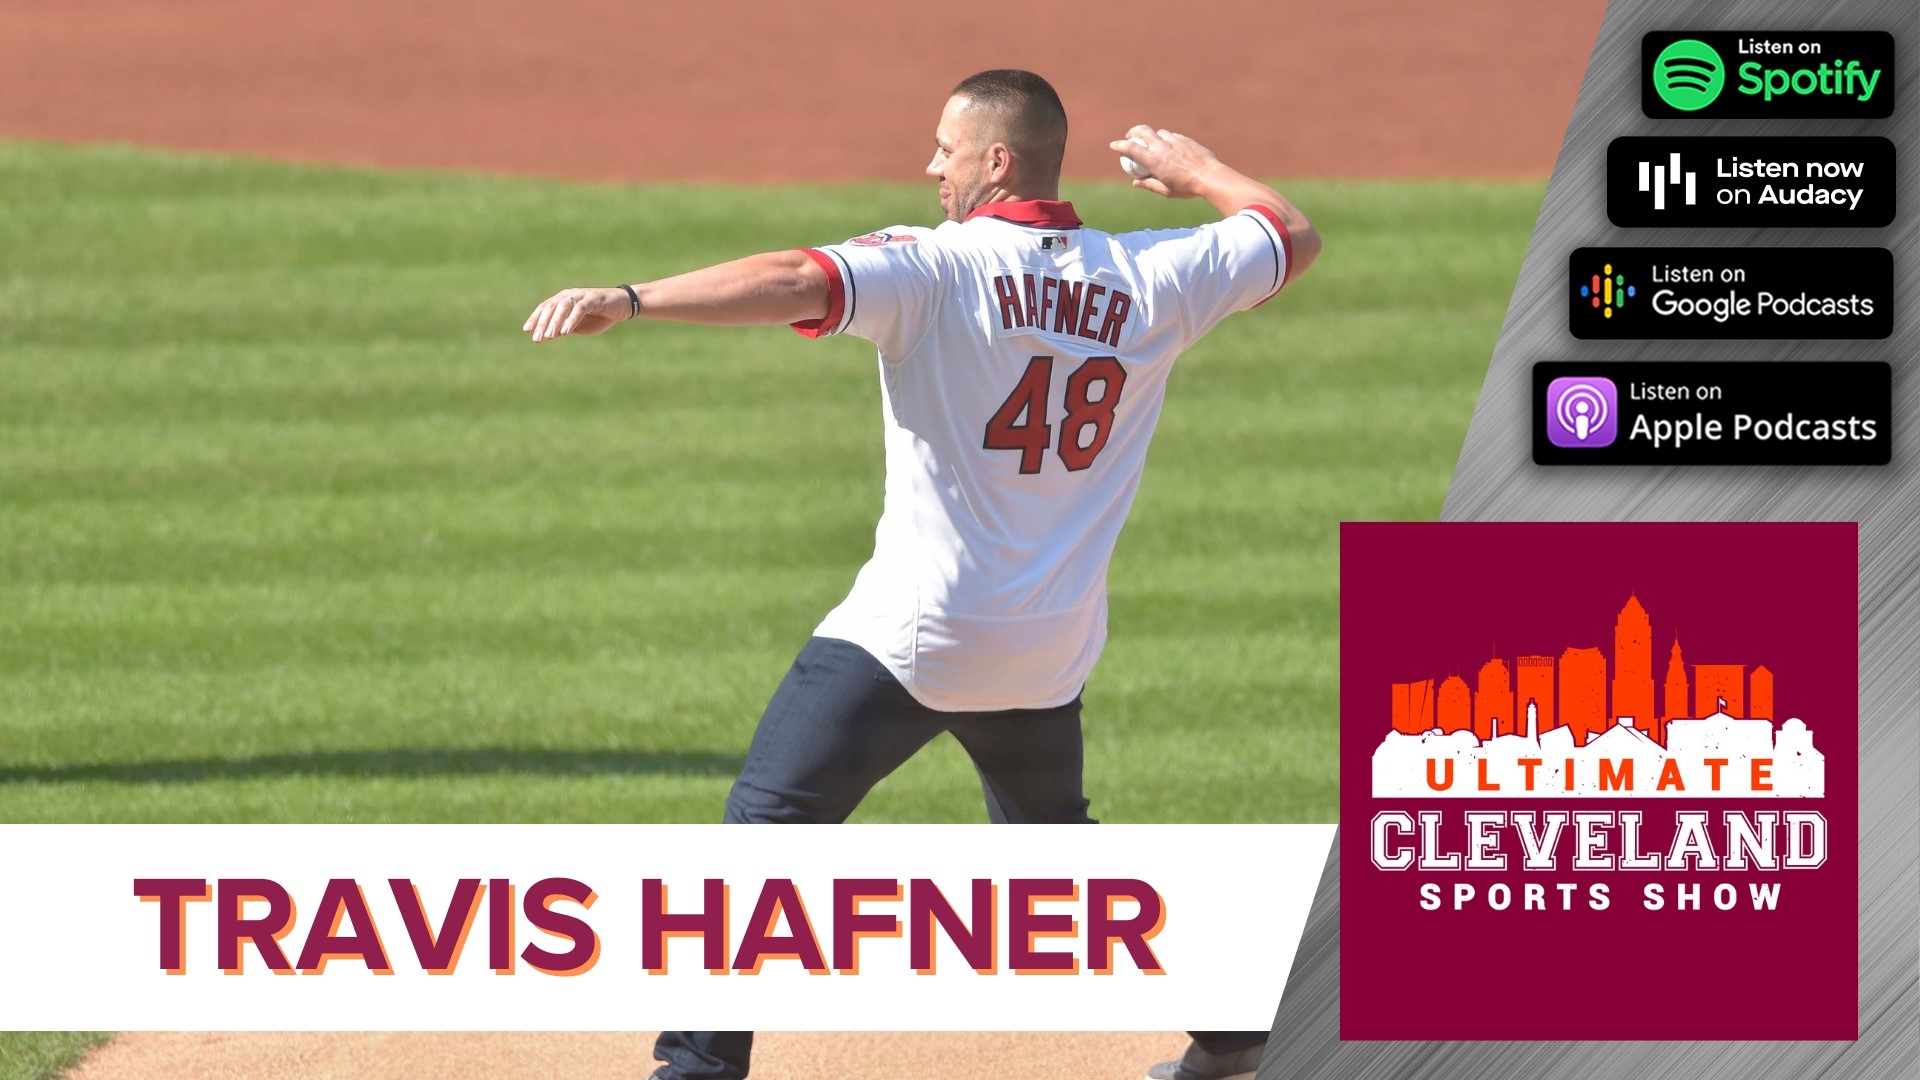 Travis Hafner joins UCSS speaking on his high school, what he misses about playing baseball, and his best teammates.